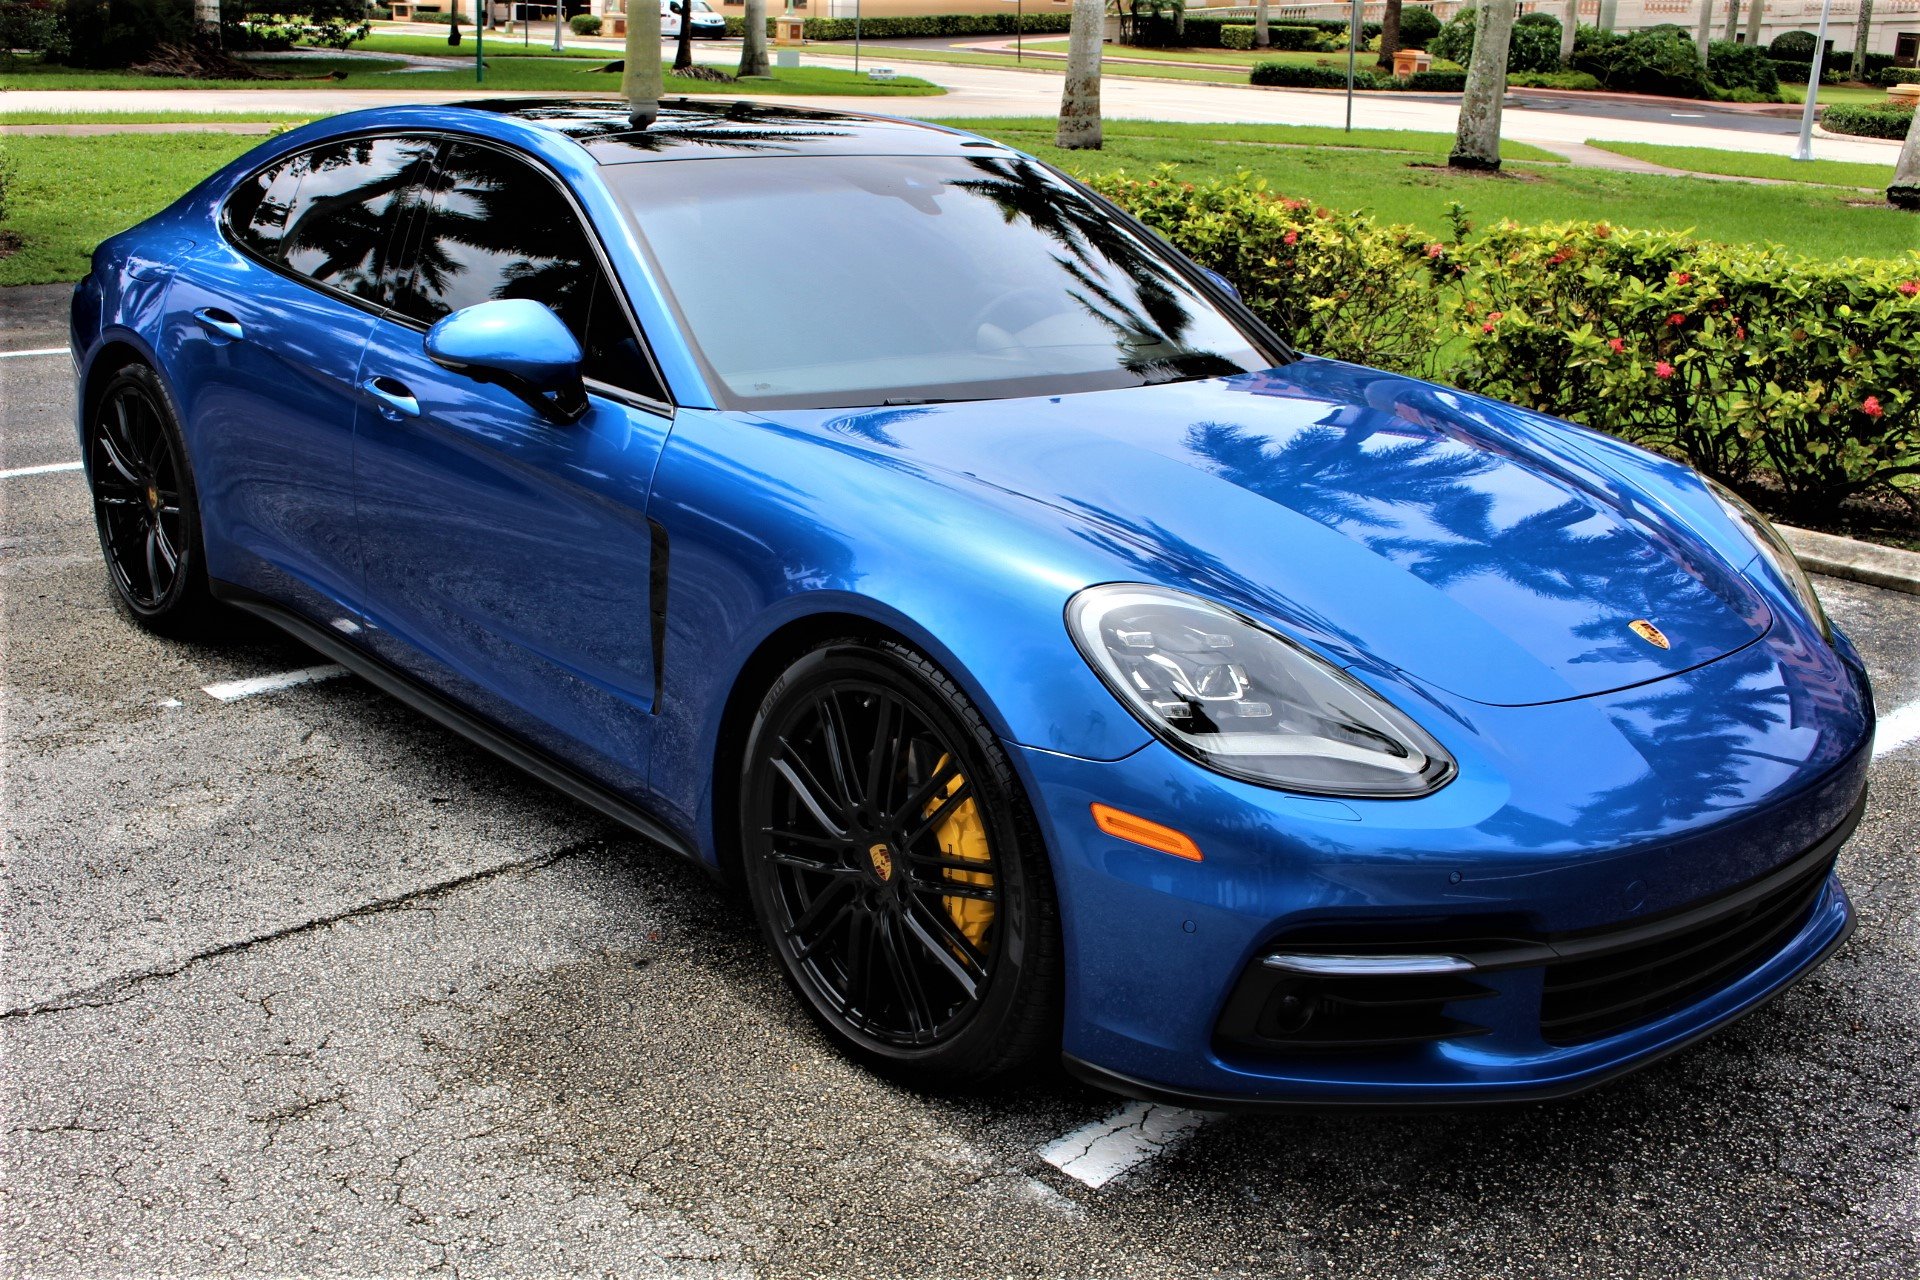 Used 2017 Porsche Panamera 4S for sale Sold at The Gables Sports Cars in Miami FL 33146 1